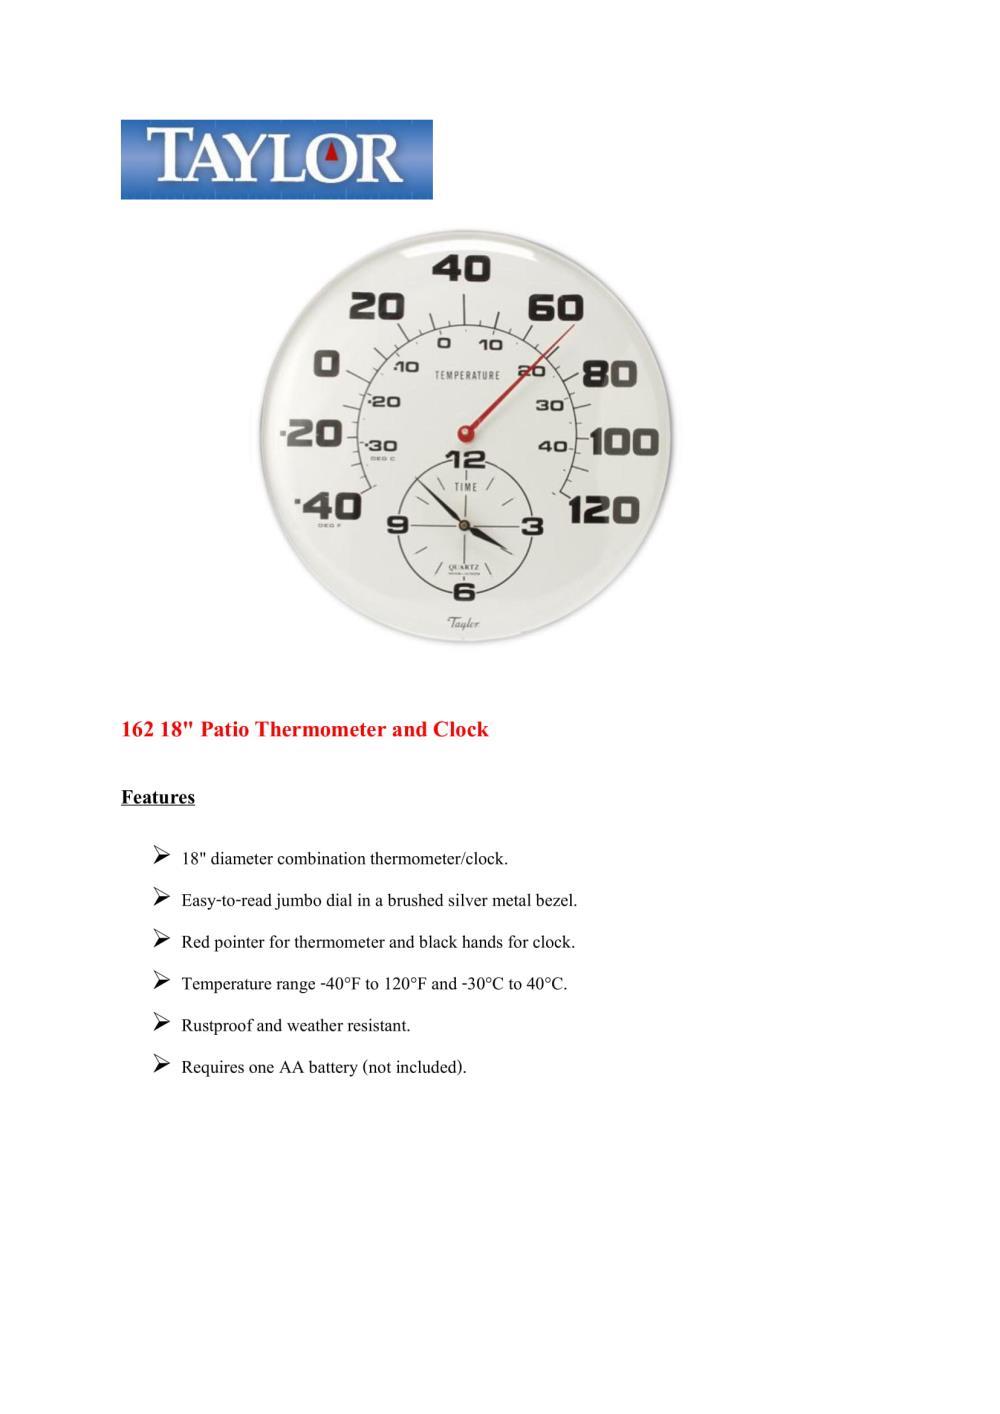 Taylor 162 Patio Thermometer and Clock วัดอุณหภูมิ 